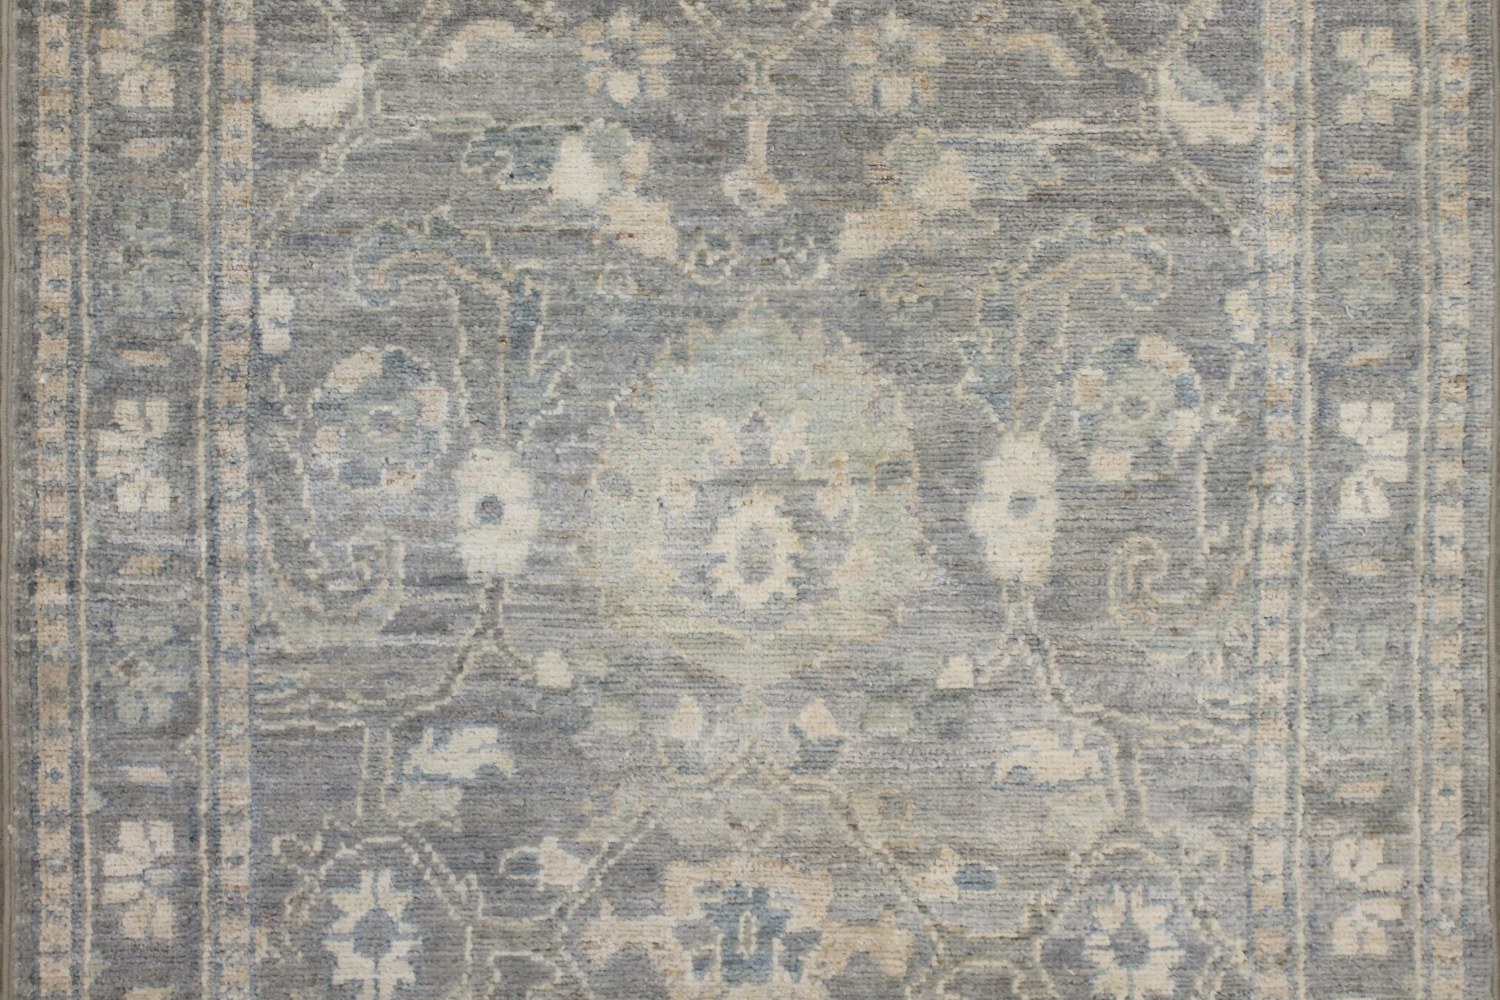 12 ft. Runner Aryana & Antique Revivals Hand Knotted Wool Area Rug - MR028805